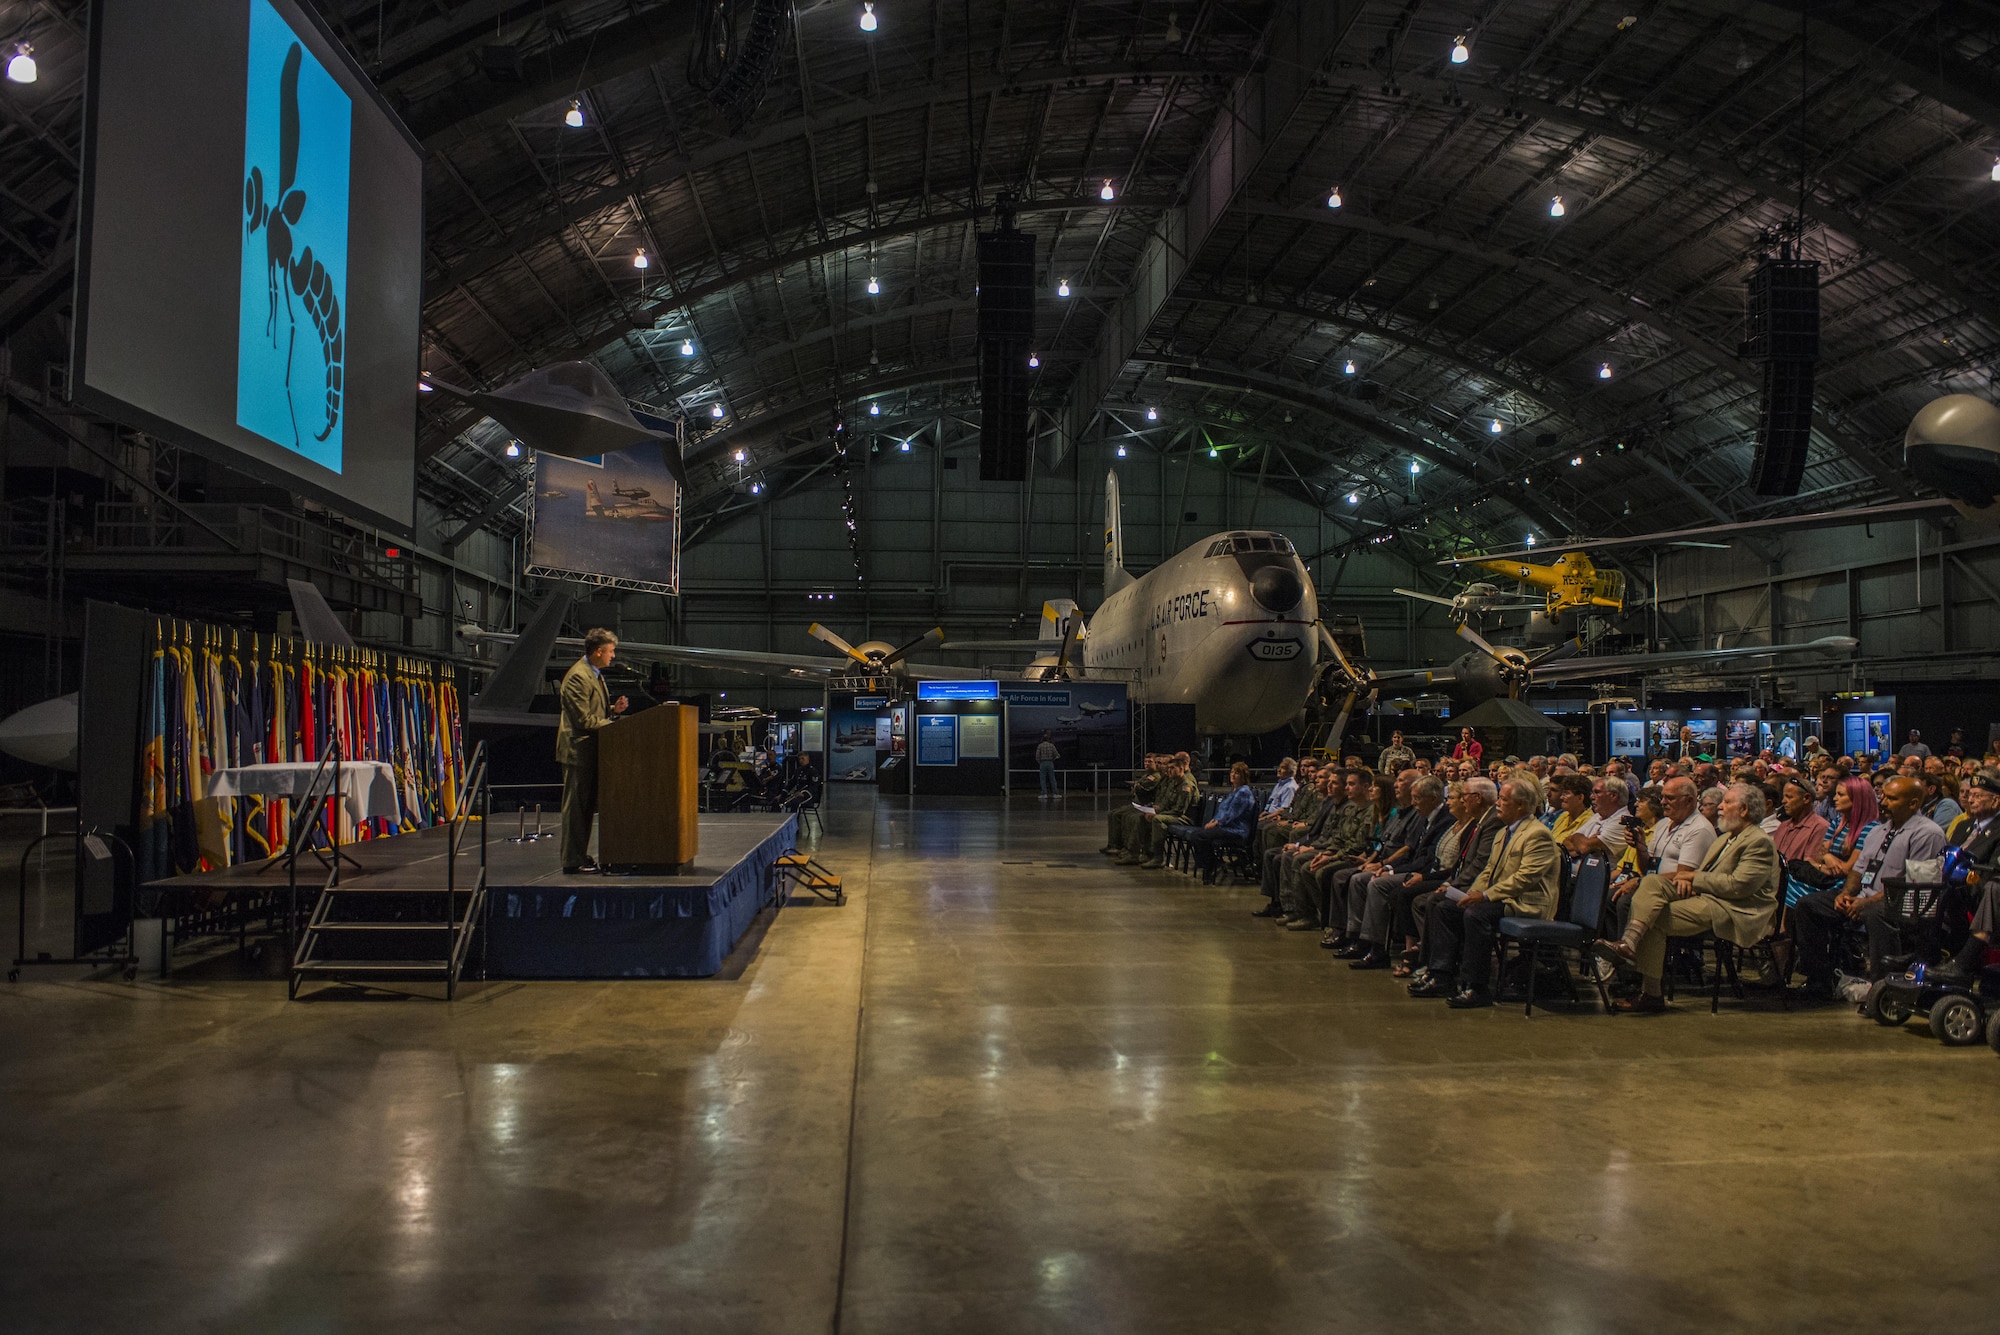 A crowd of military veterans, current military members, family and friends listen during the Green Hornet Dedication ceremony at the National Museum of the United States Air Force near Wright-Patterson Air Force Base, Ohio, Sept. 15, 2016. More than 300 people were in attendance of the ceremony which honored veterans of the 20th Special Operations Squadron with an exhibit and diorama depicting their rescue mission in Vietnam on Nov. 26, 1968. (U.S. Air Force photo by Senior Airman Luke Kitterman/Released)